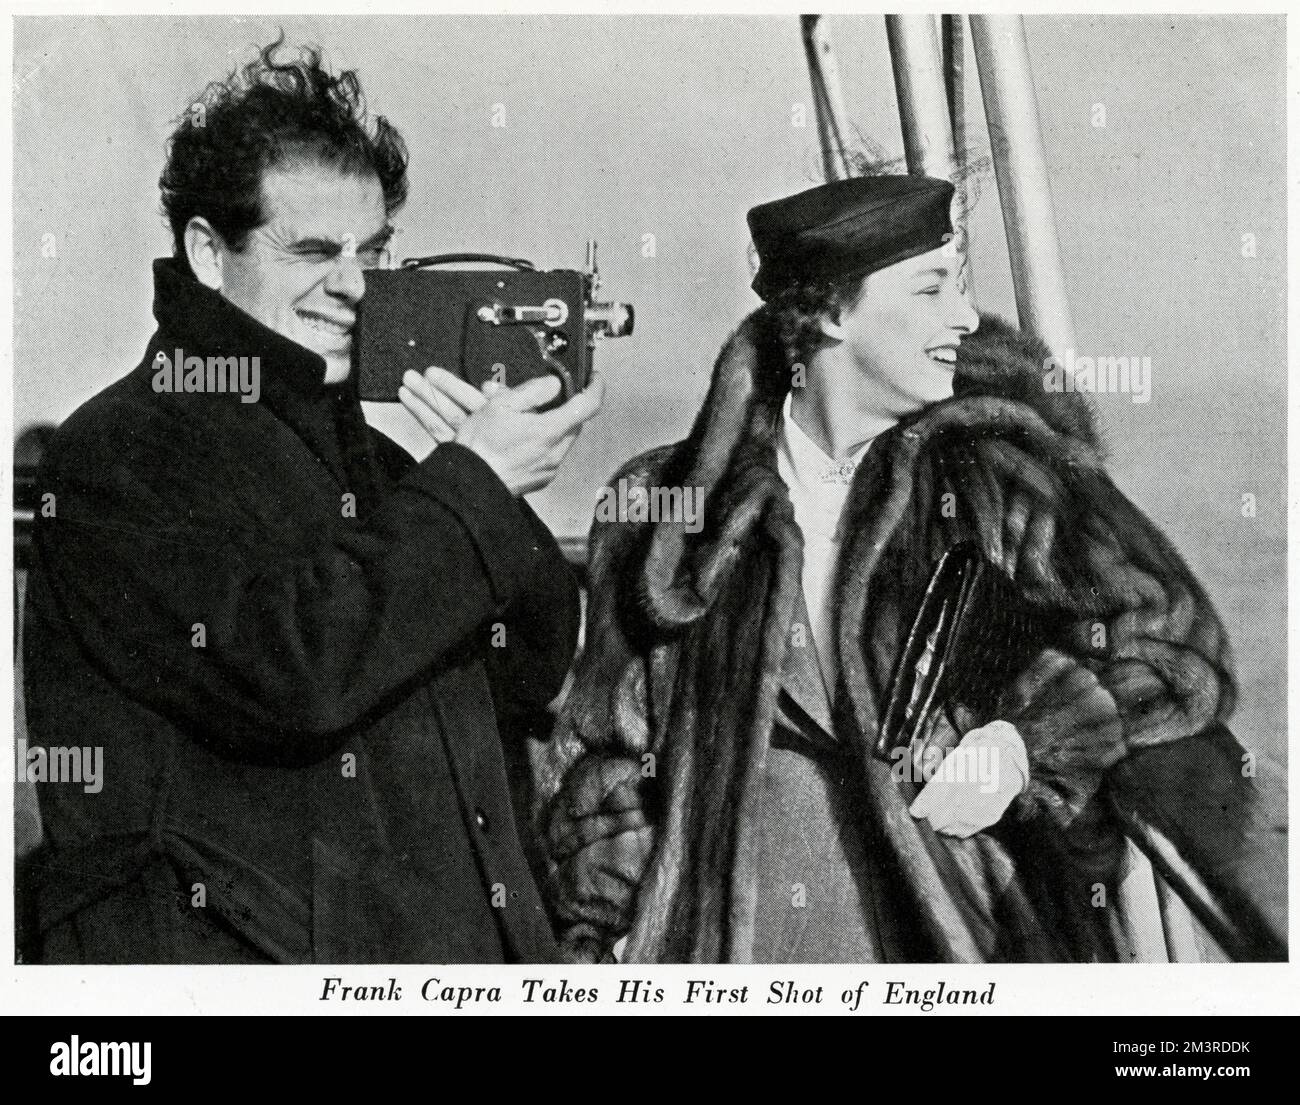 American film director, Frank Capra, along with his wife, Lucille Warner, arrives in Egnland on the ocean liner Normandie.  He attended the film premiere of Lost Horizon at the Tivoli cinema in London.       Date: 1937 Stock Photo